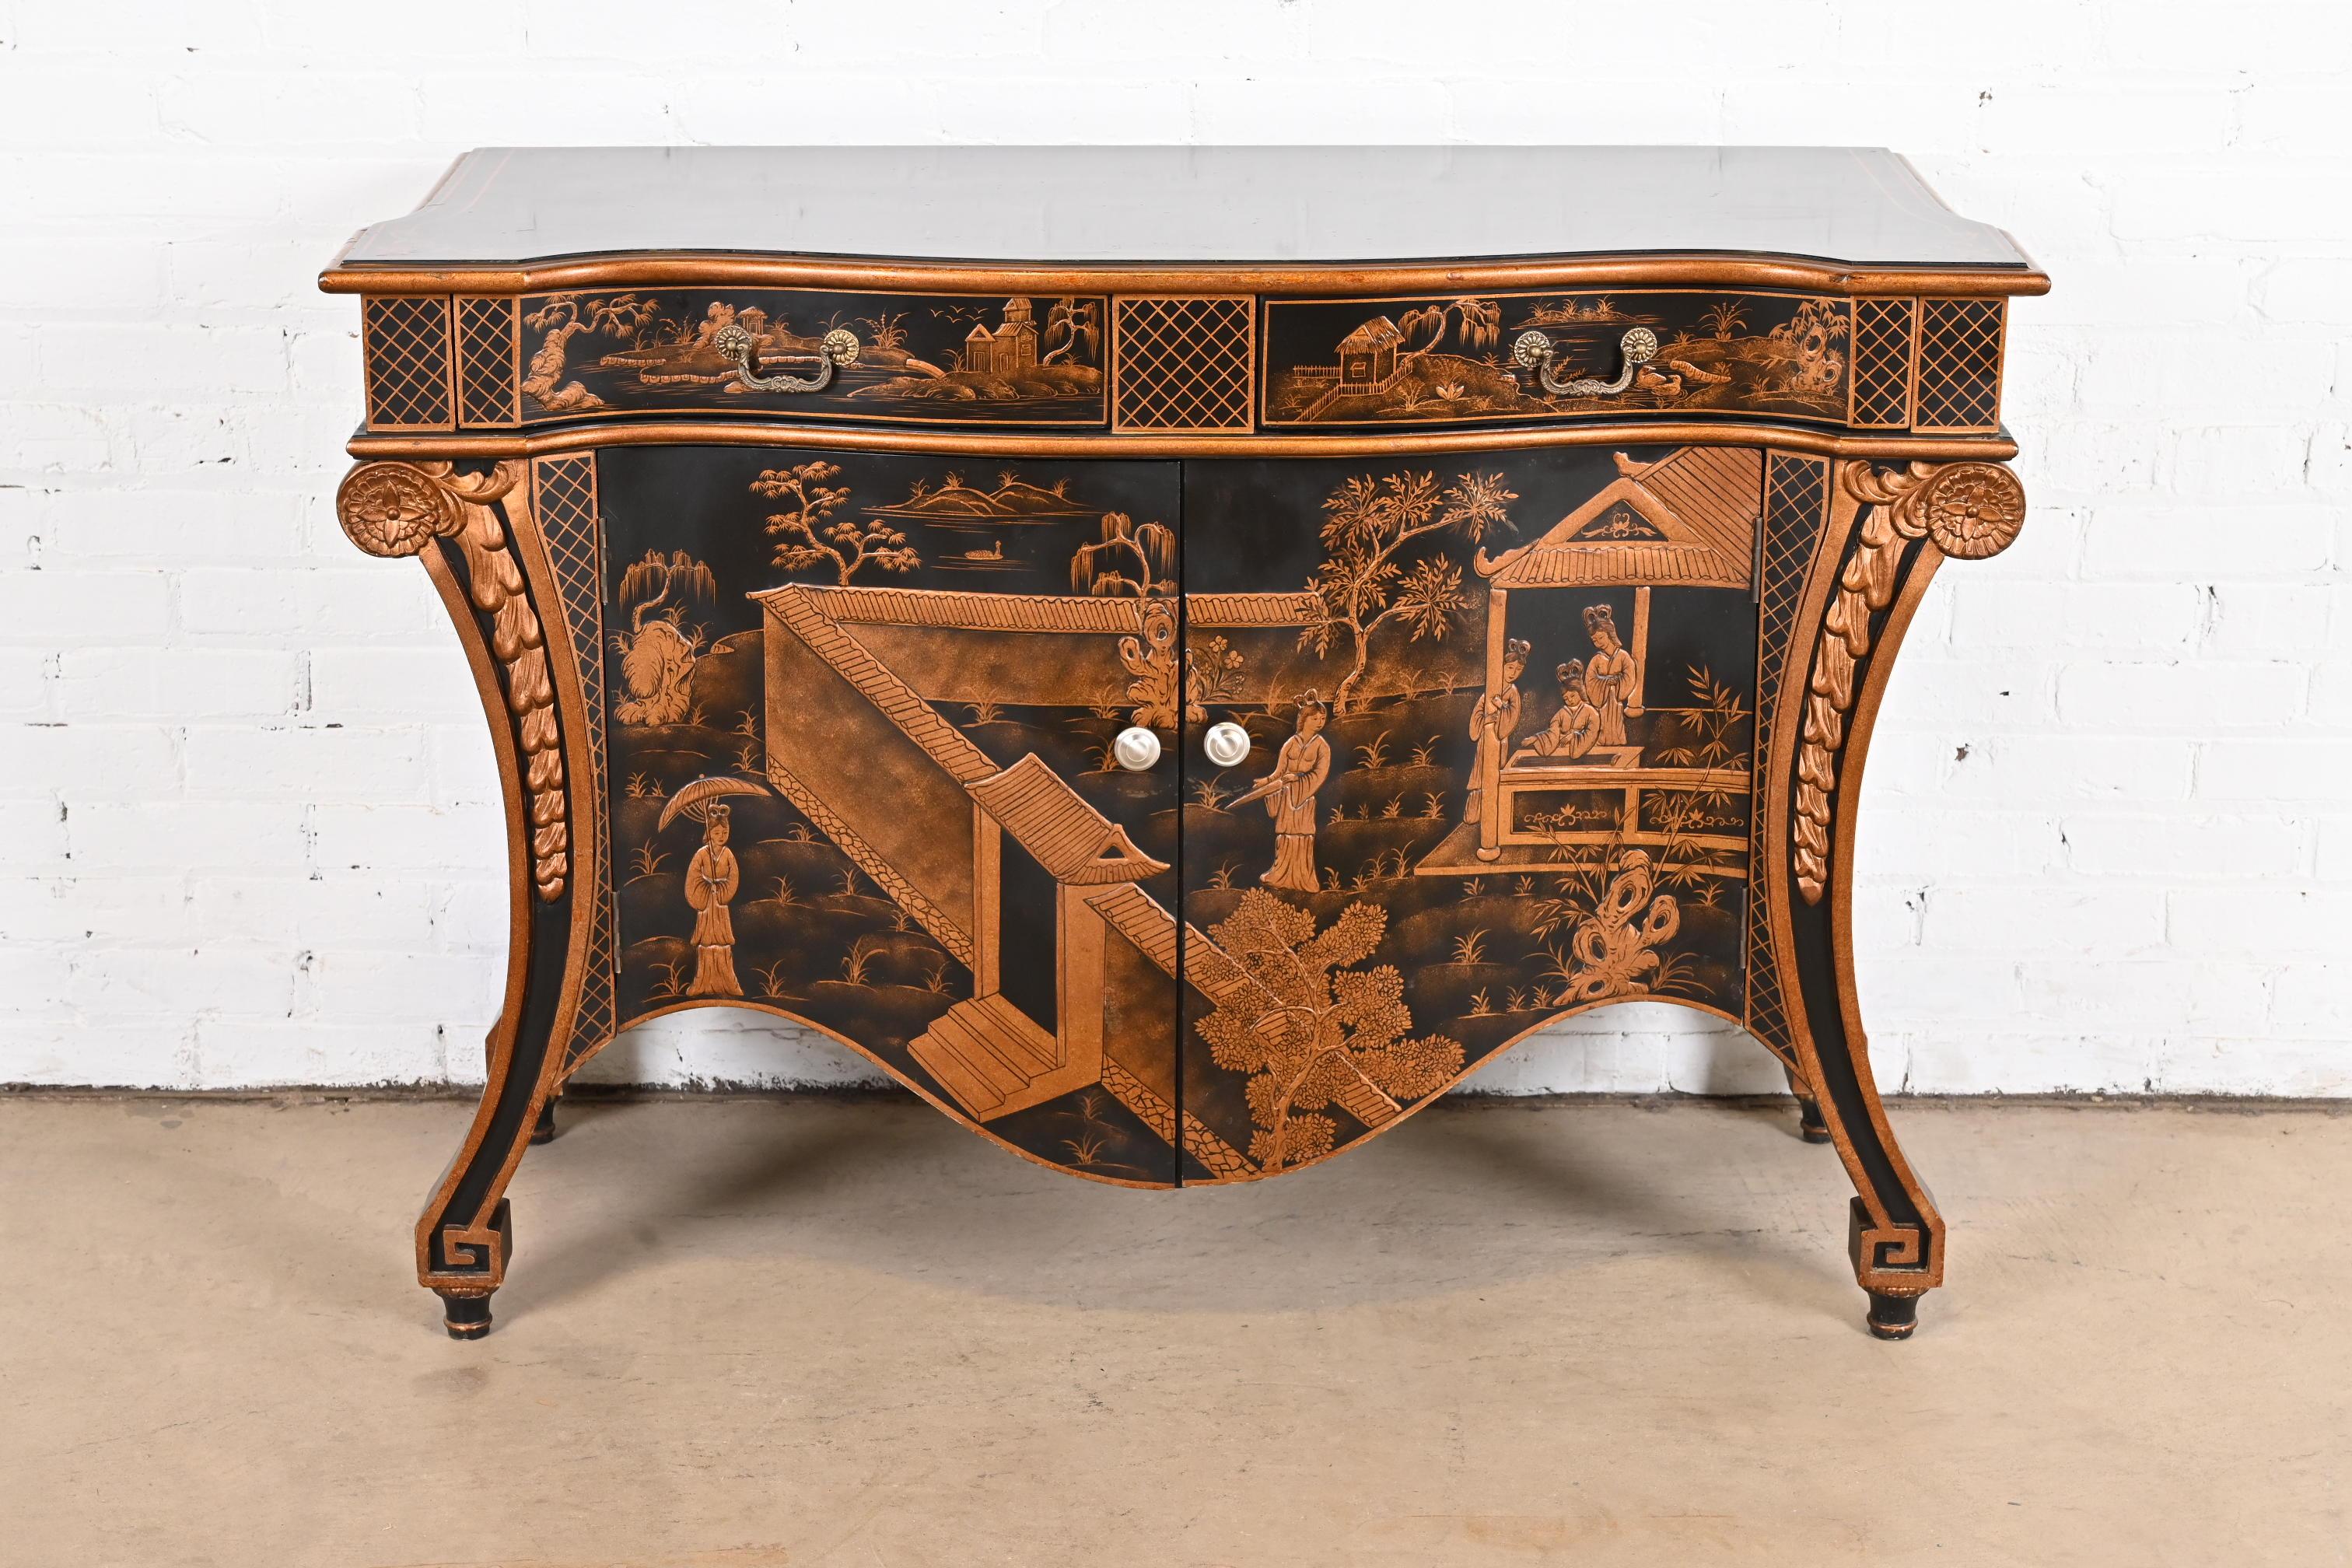 A gorgeous Chippendale Chinoiserie style commode or server

In the manner of the Stately Homes Chinoiserie Commode by Baker Furniture

By Chelsea House

circa Late 20th century

Black lacquered case, with hand painted Asian